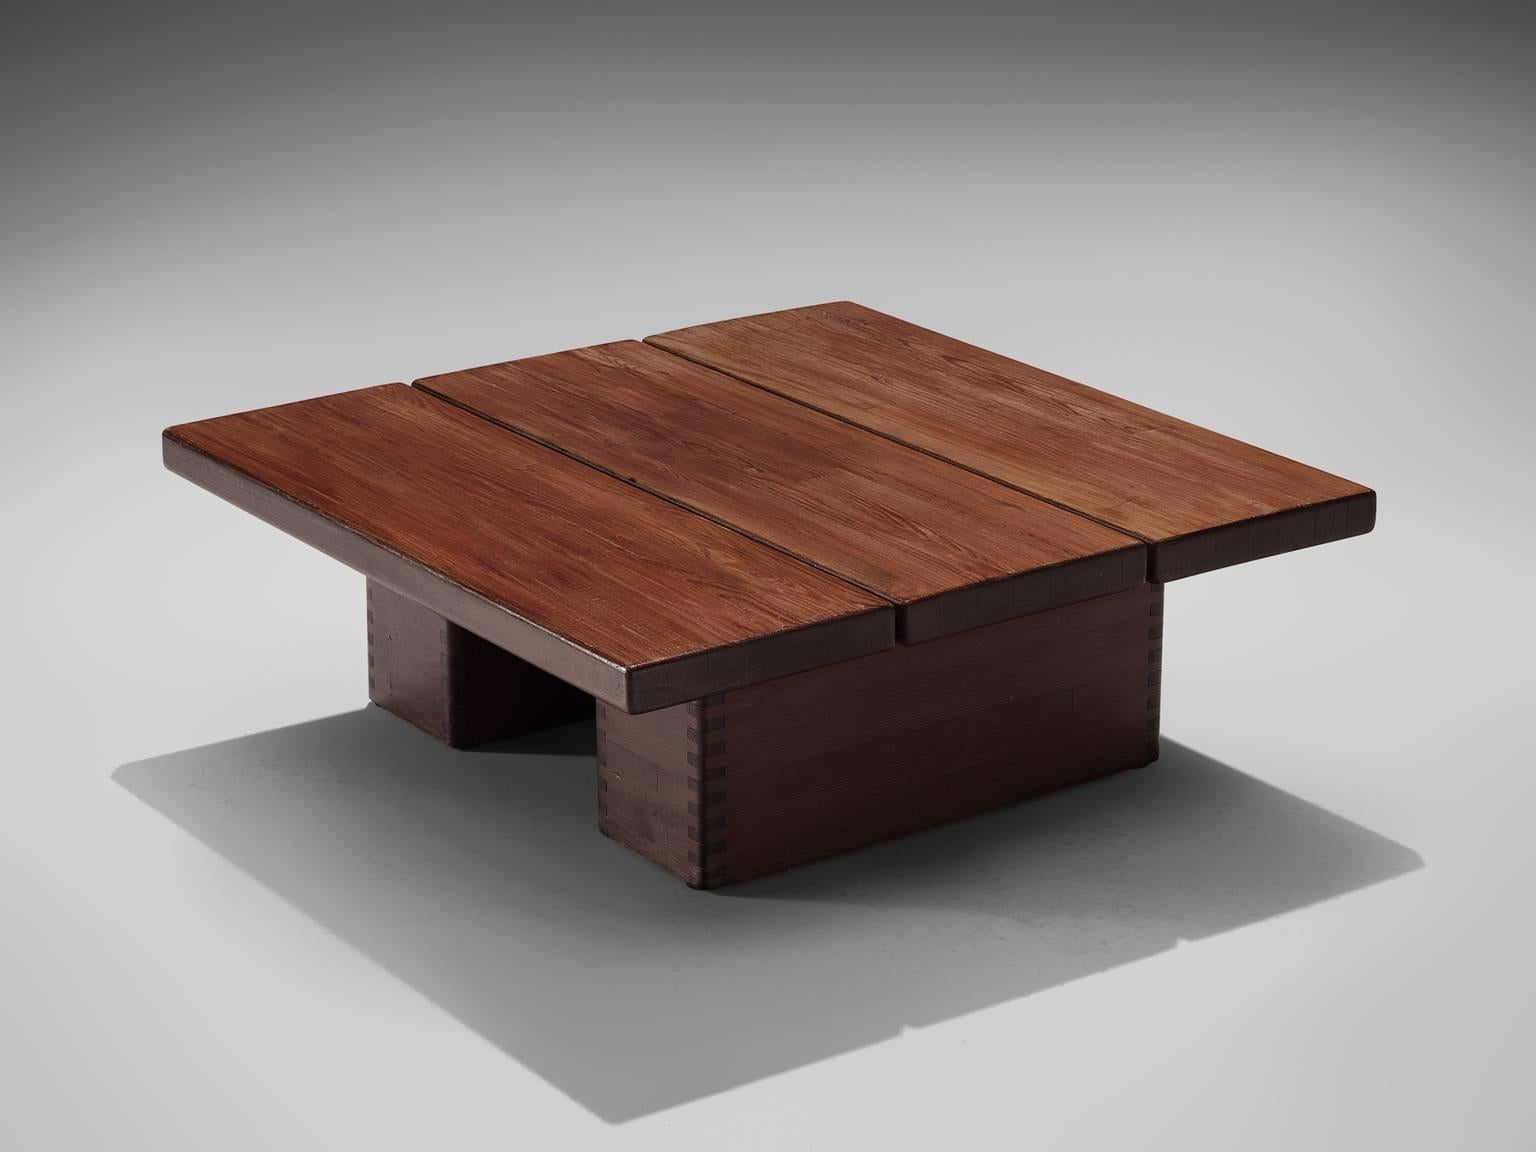 Ilmari Tapiovaara for Laukaan Puu, coffee table, stained pine, Finland, 1950s.

This pine coffee table is modest and simple in its design and therefore breaths the feeling of Nordic design. This means that it is well-constructed as can be seen in